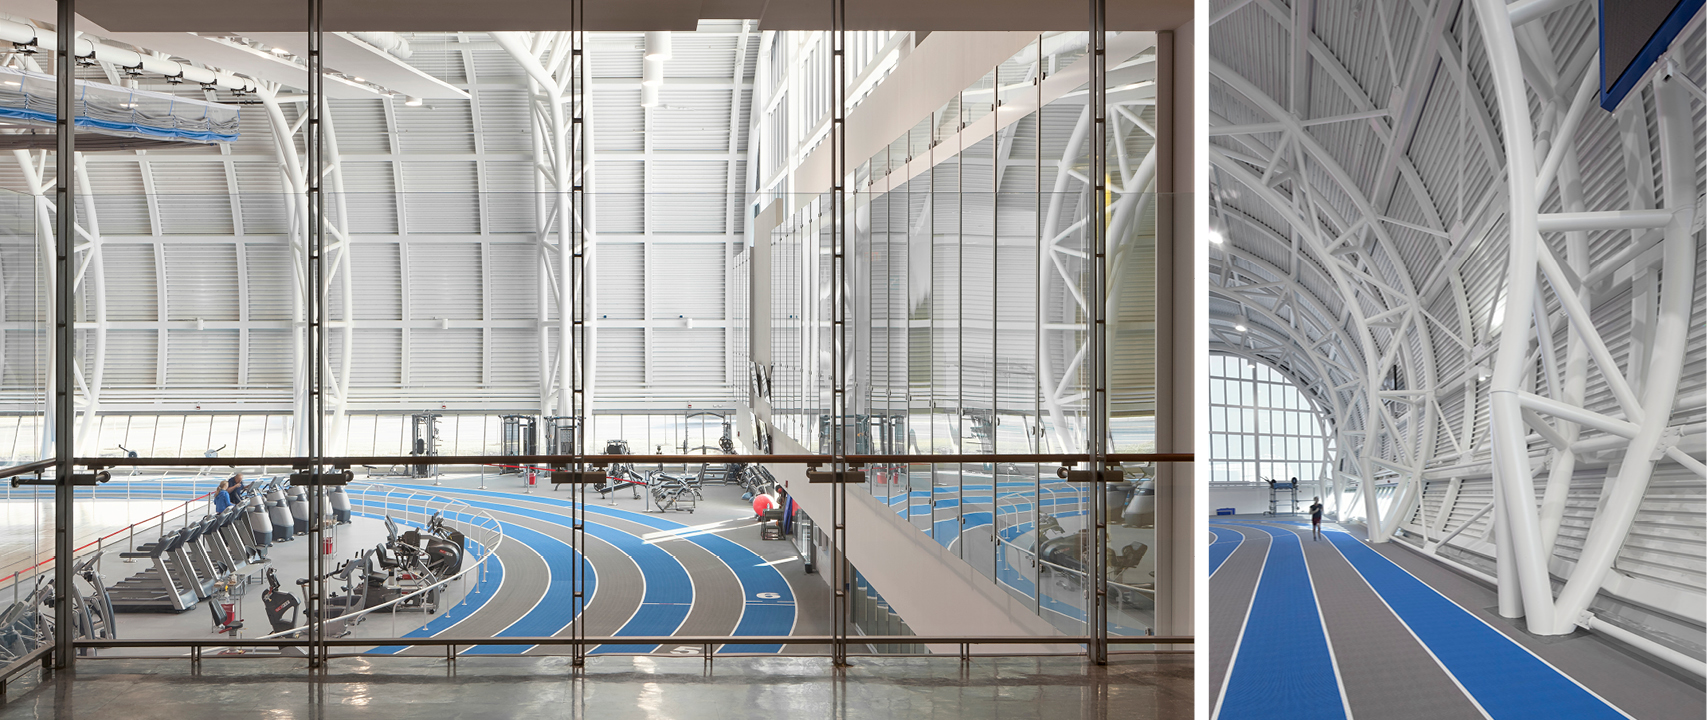 Left: looking through full height windows into a large, open, running track area. Right: Indoor running track with large, curved metal structure.